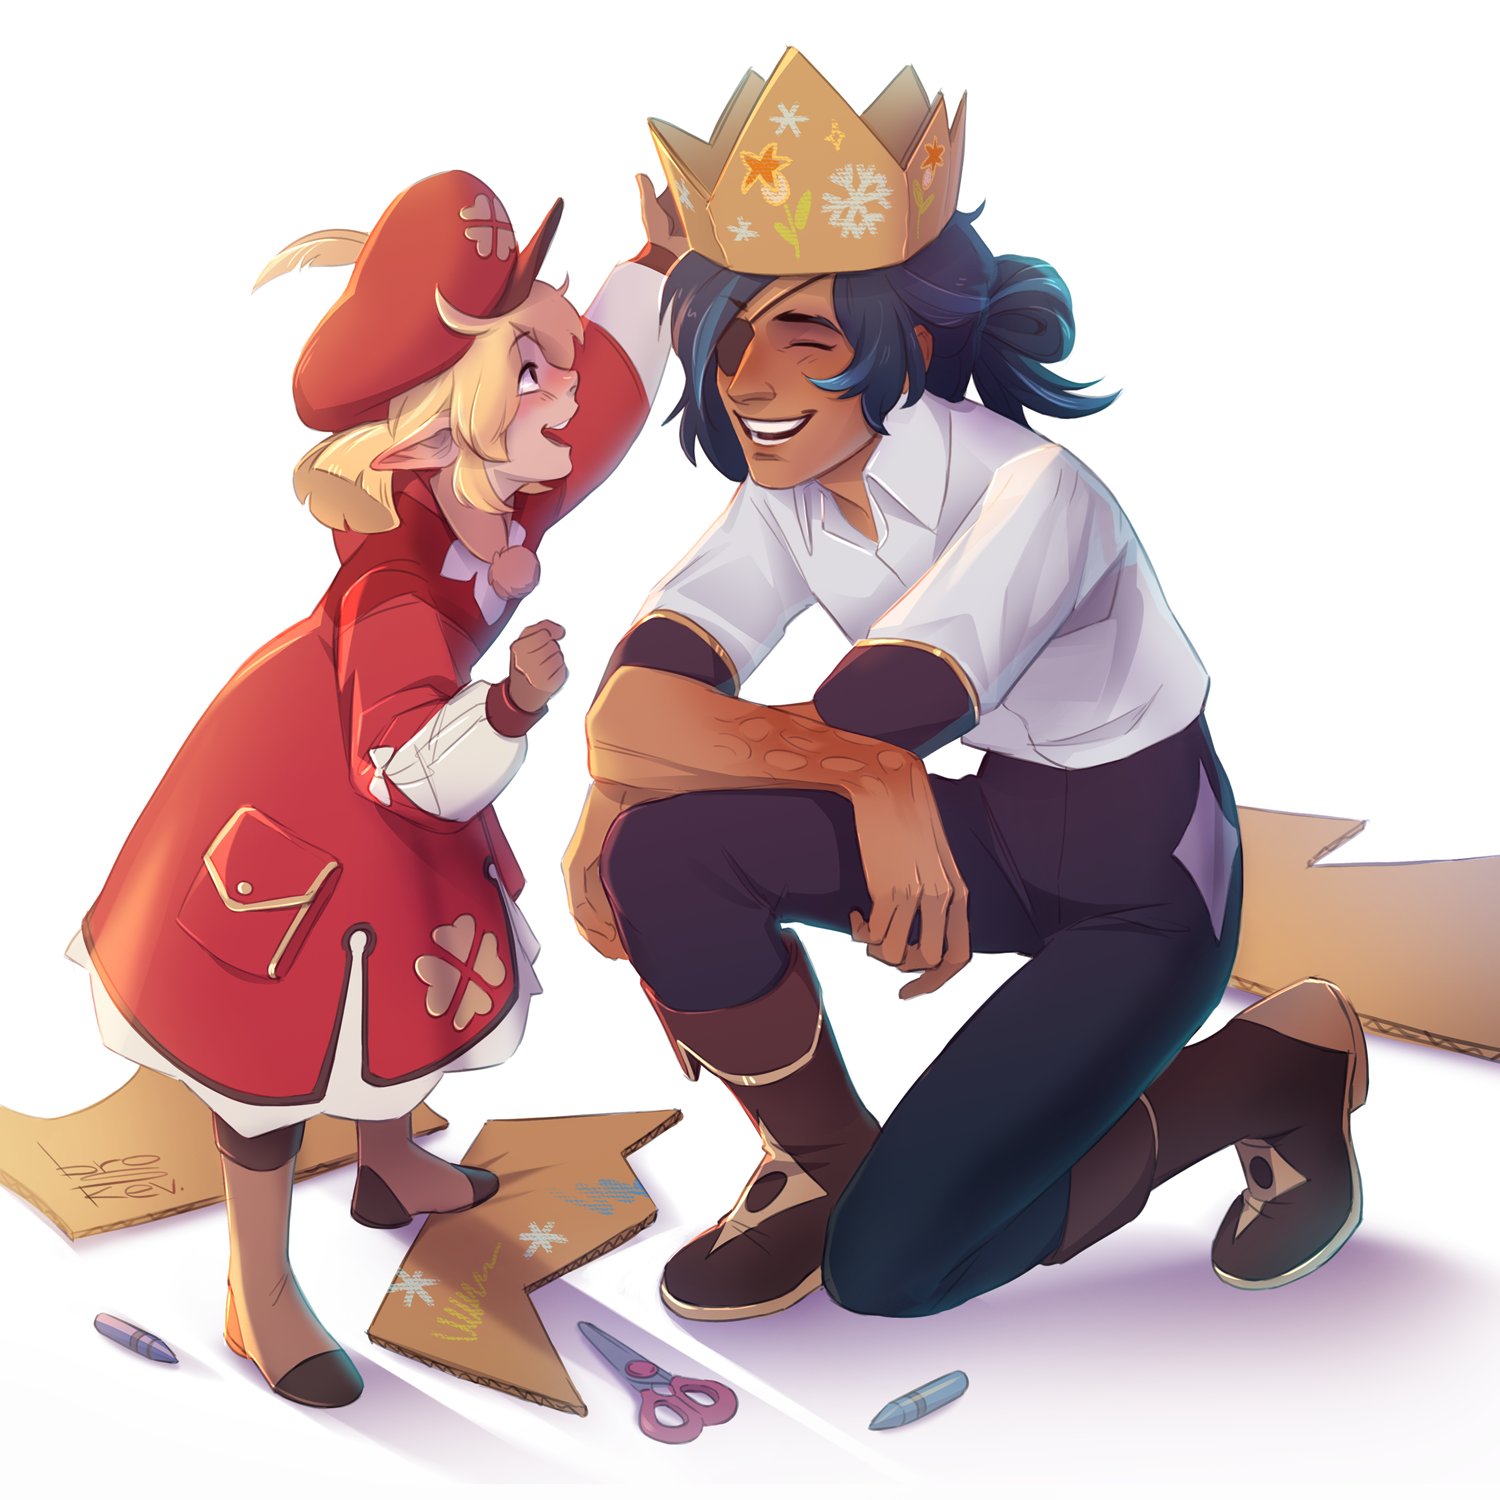 broskev | НЕТ ВОЙНЕ on Twitter: "a prince without a kingdom, but with the  most beautiful crown ✨ #genshinimpact #kaeya #klee https://t.co/LpDmir8UxK"  / Twitter